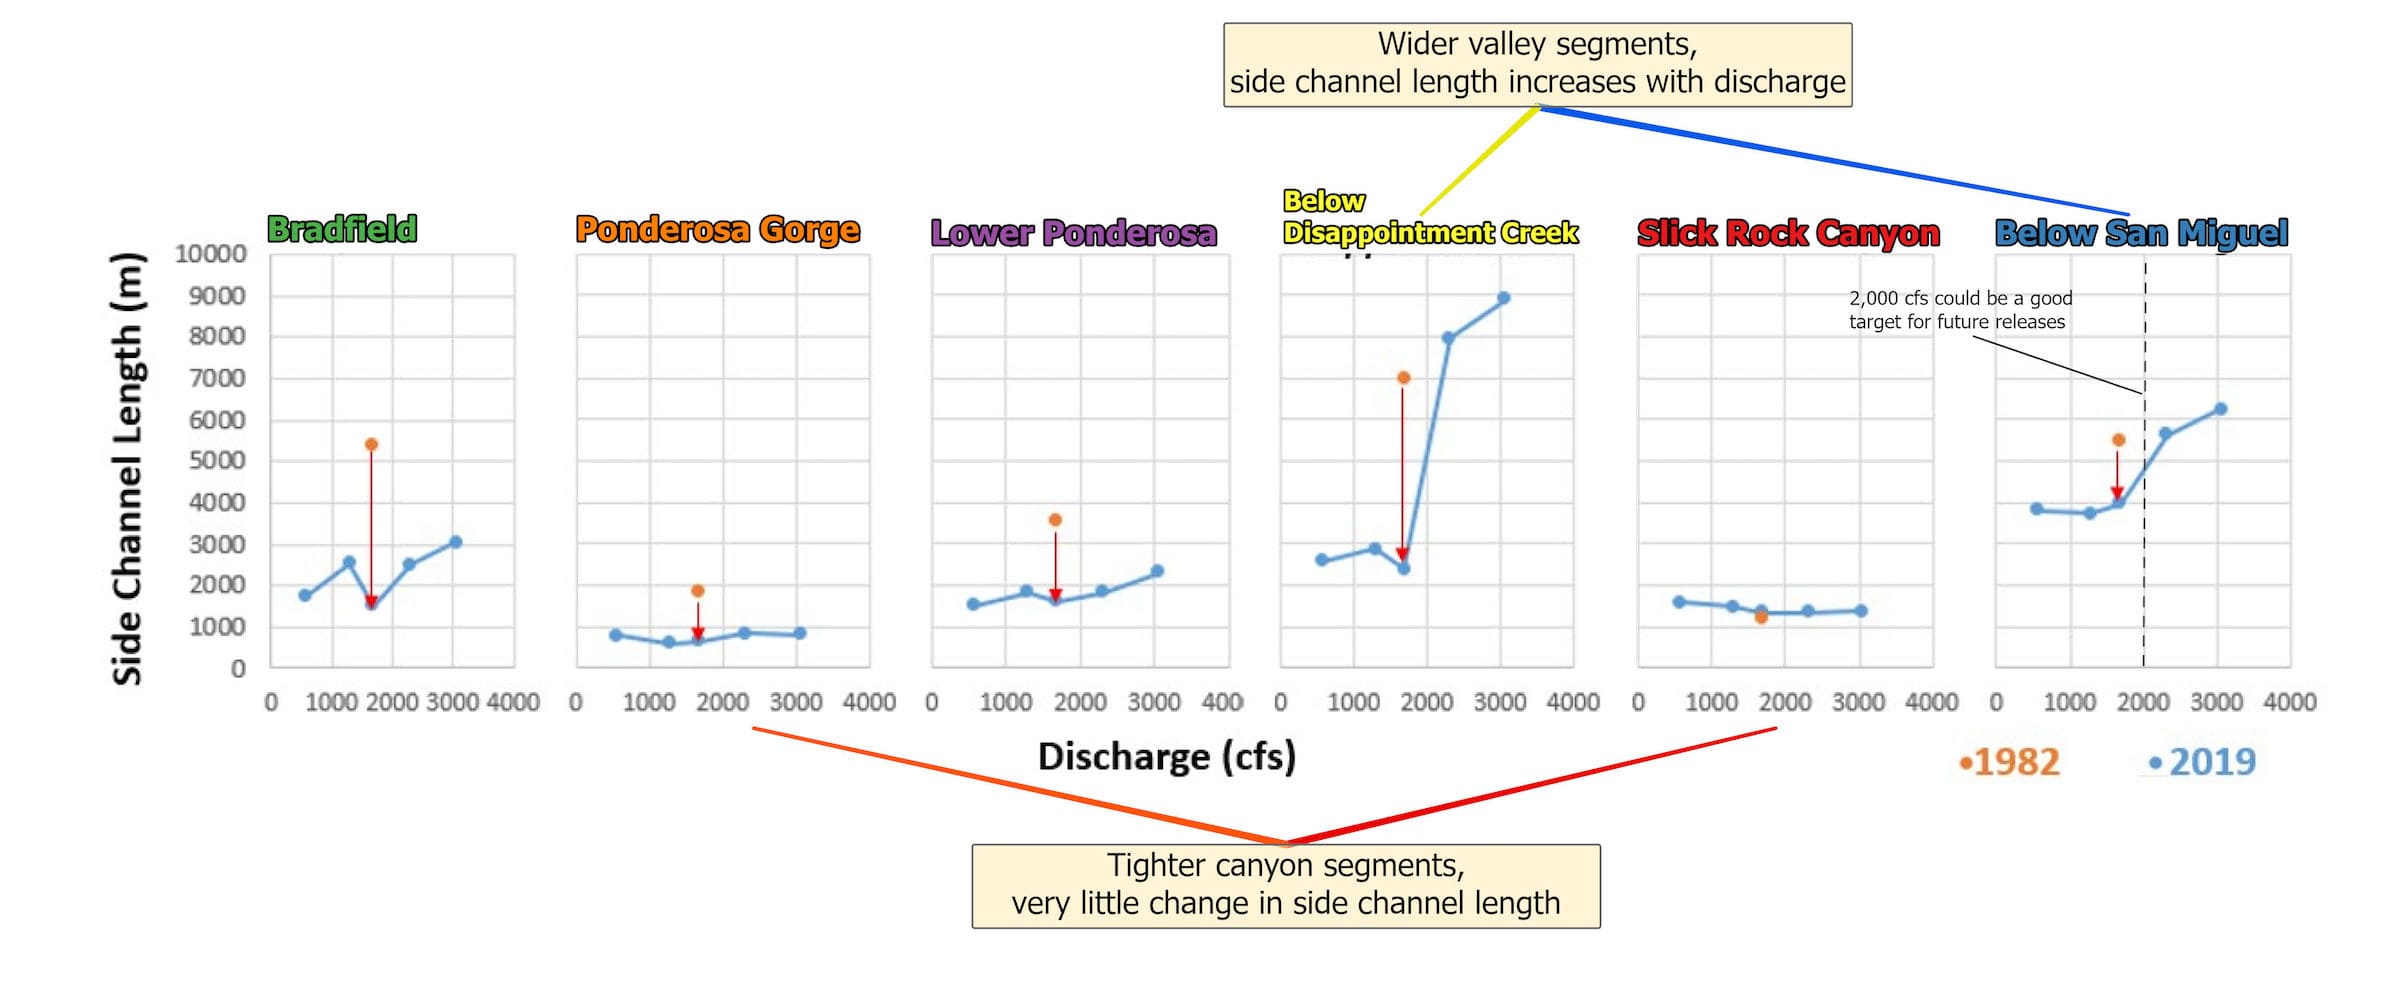 Graphs showing the side channel lengths according to discharge in c f s, between 1982 and 2019. Details above.